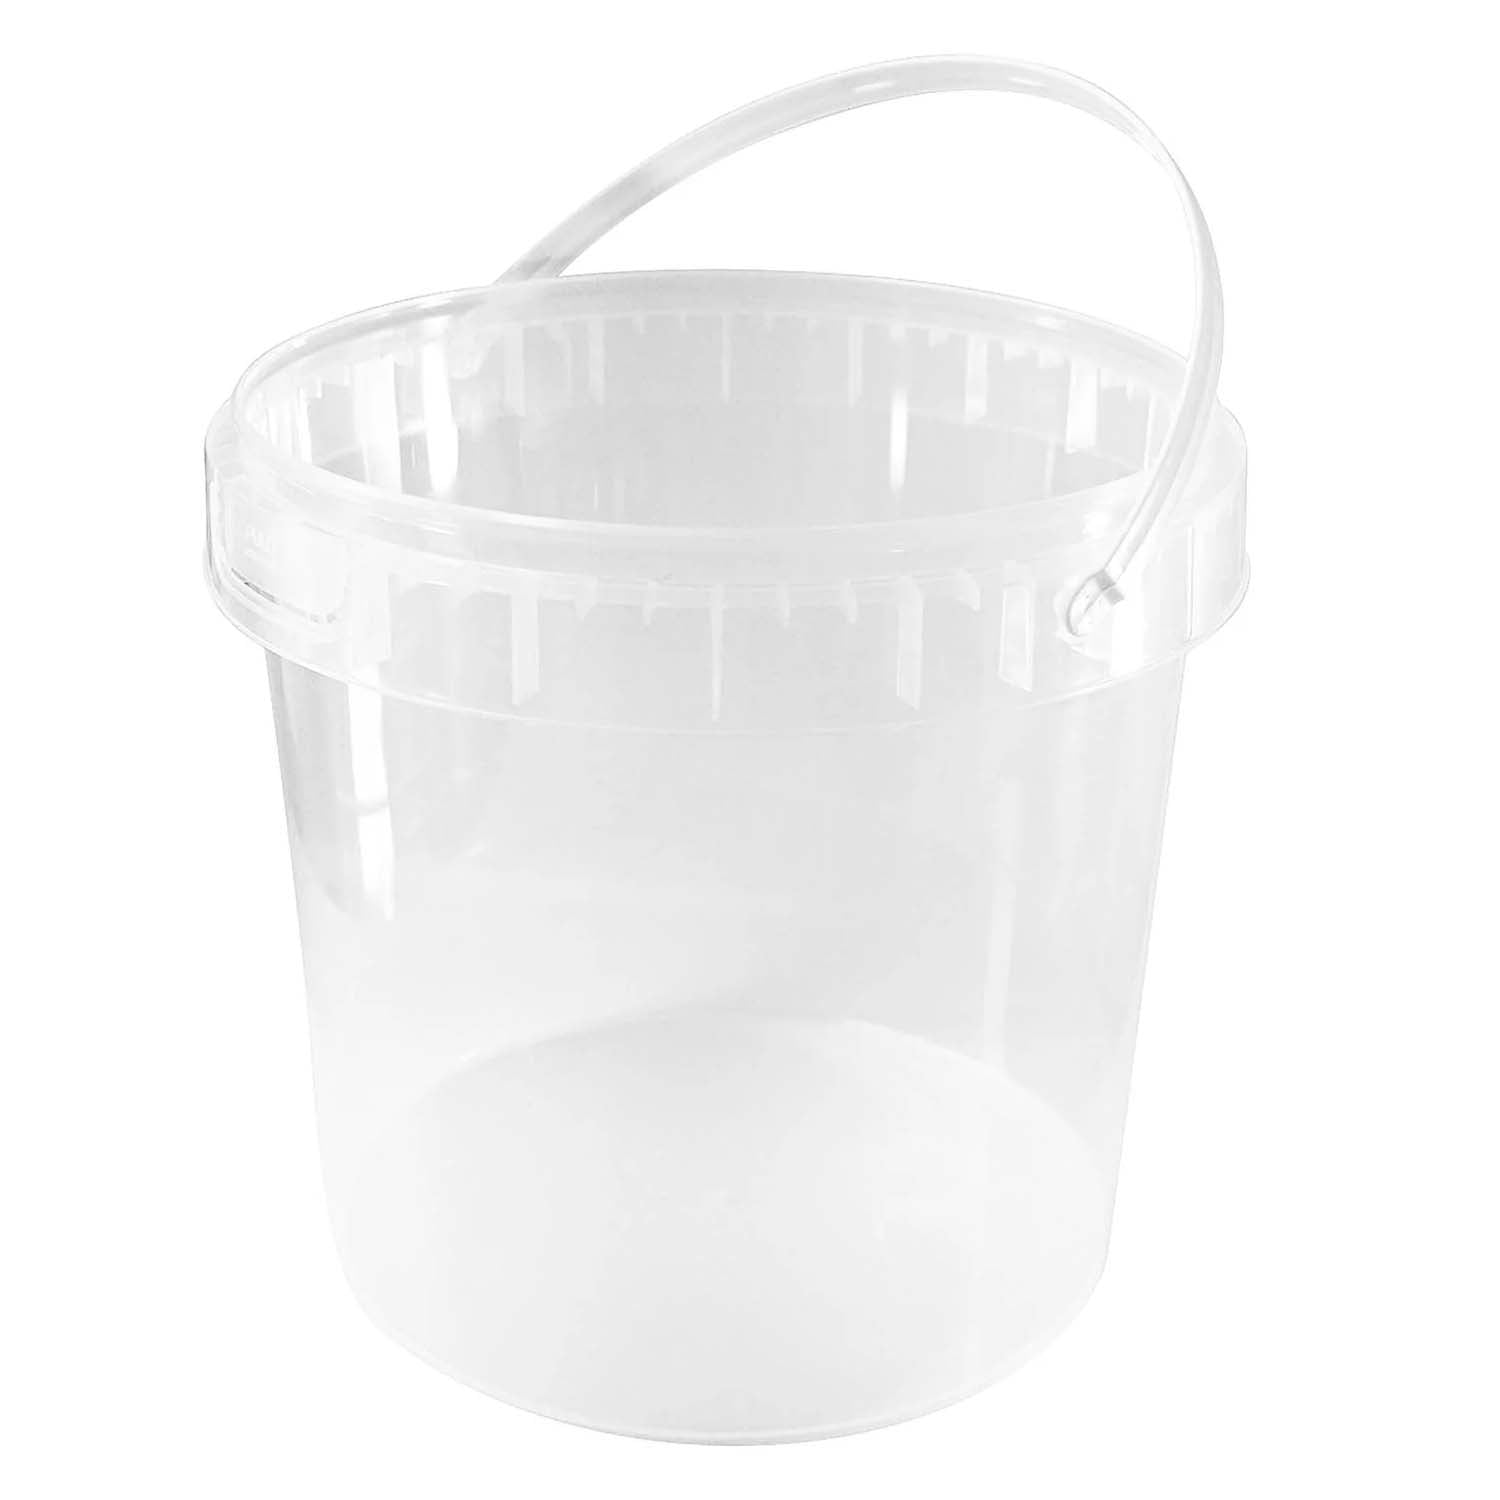 1 Gallon (128 oz) Clear Plastic Bucket with Lid and Handle (20 Pack), Ice Cream Tub with Lids - Food Grade Freezer and Microwave Safe Food Storage